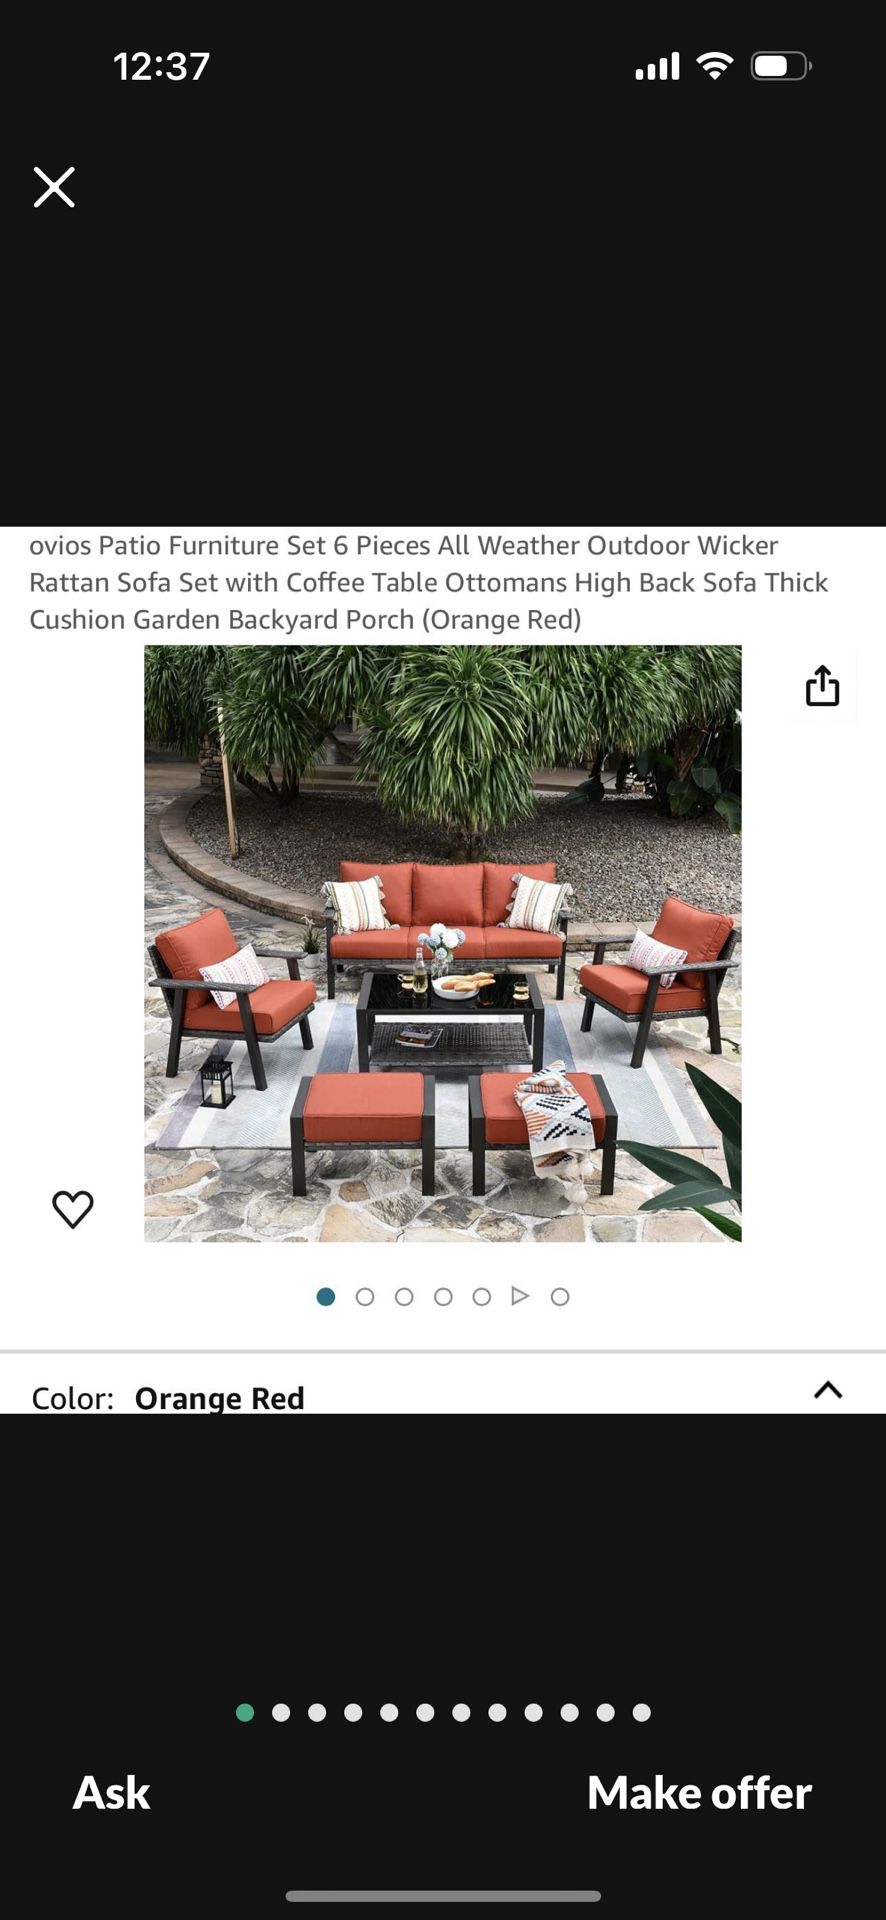 ovios Patio Furniture Set 6 Pieces All Weather Outdoor Wicker Rattan Sofa Set with Coffee Table Ottomans High Back Sofa Thick Cushion Garden Backyard